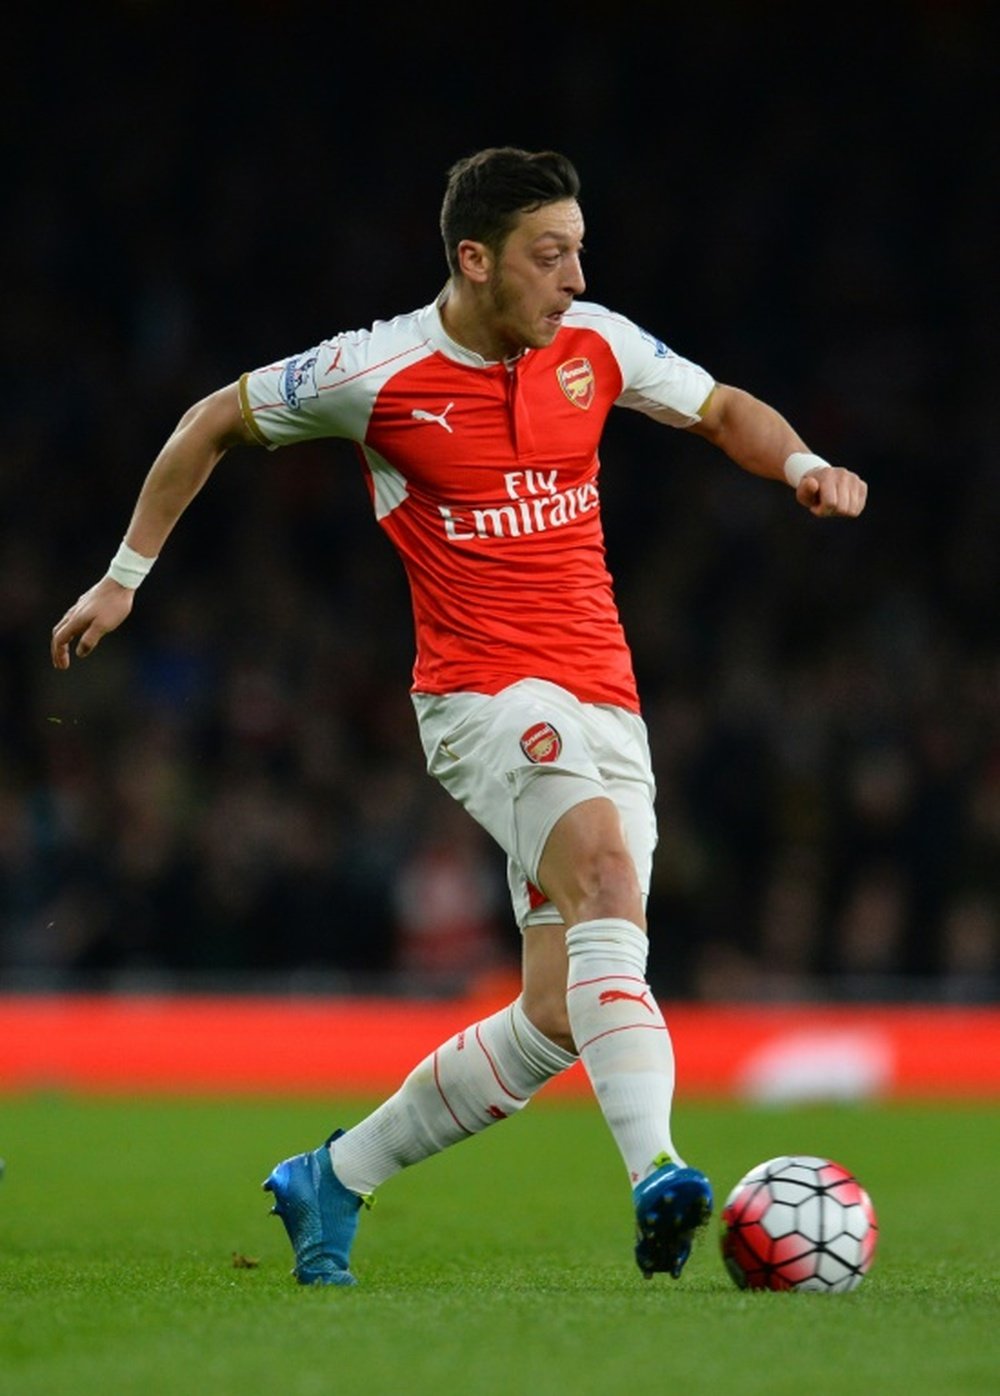 Arsenal's Mesut Ozil could make a switch to bitter rivals Manchester United. BeSoccer